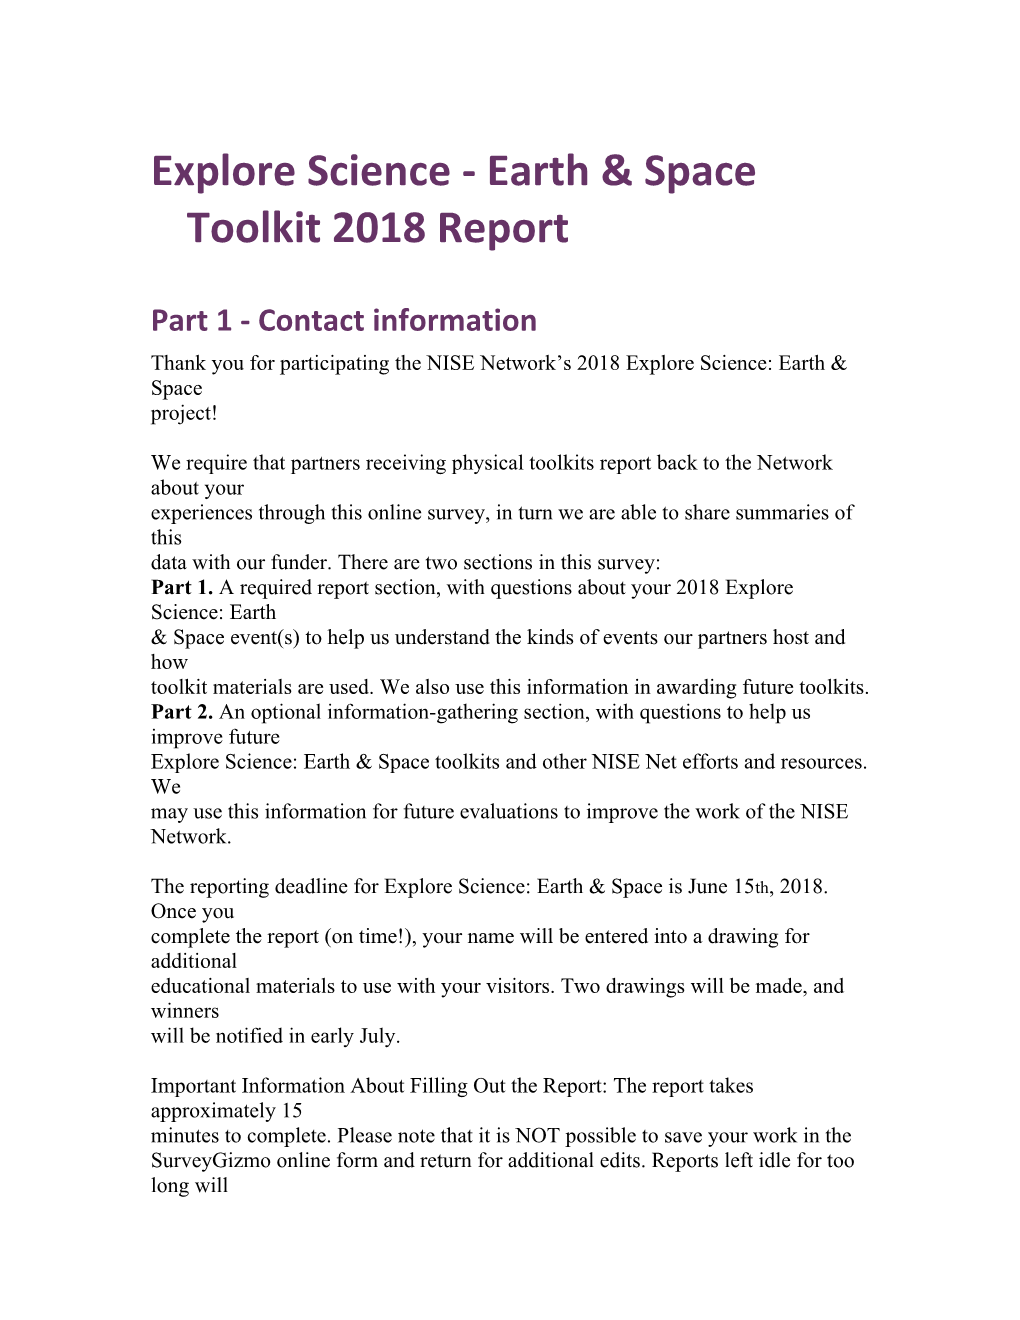 Explore Science - Earth & Space Toolkit 2018 Report